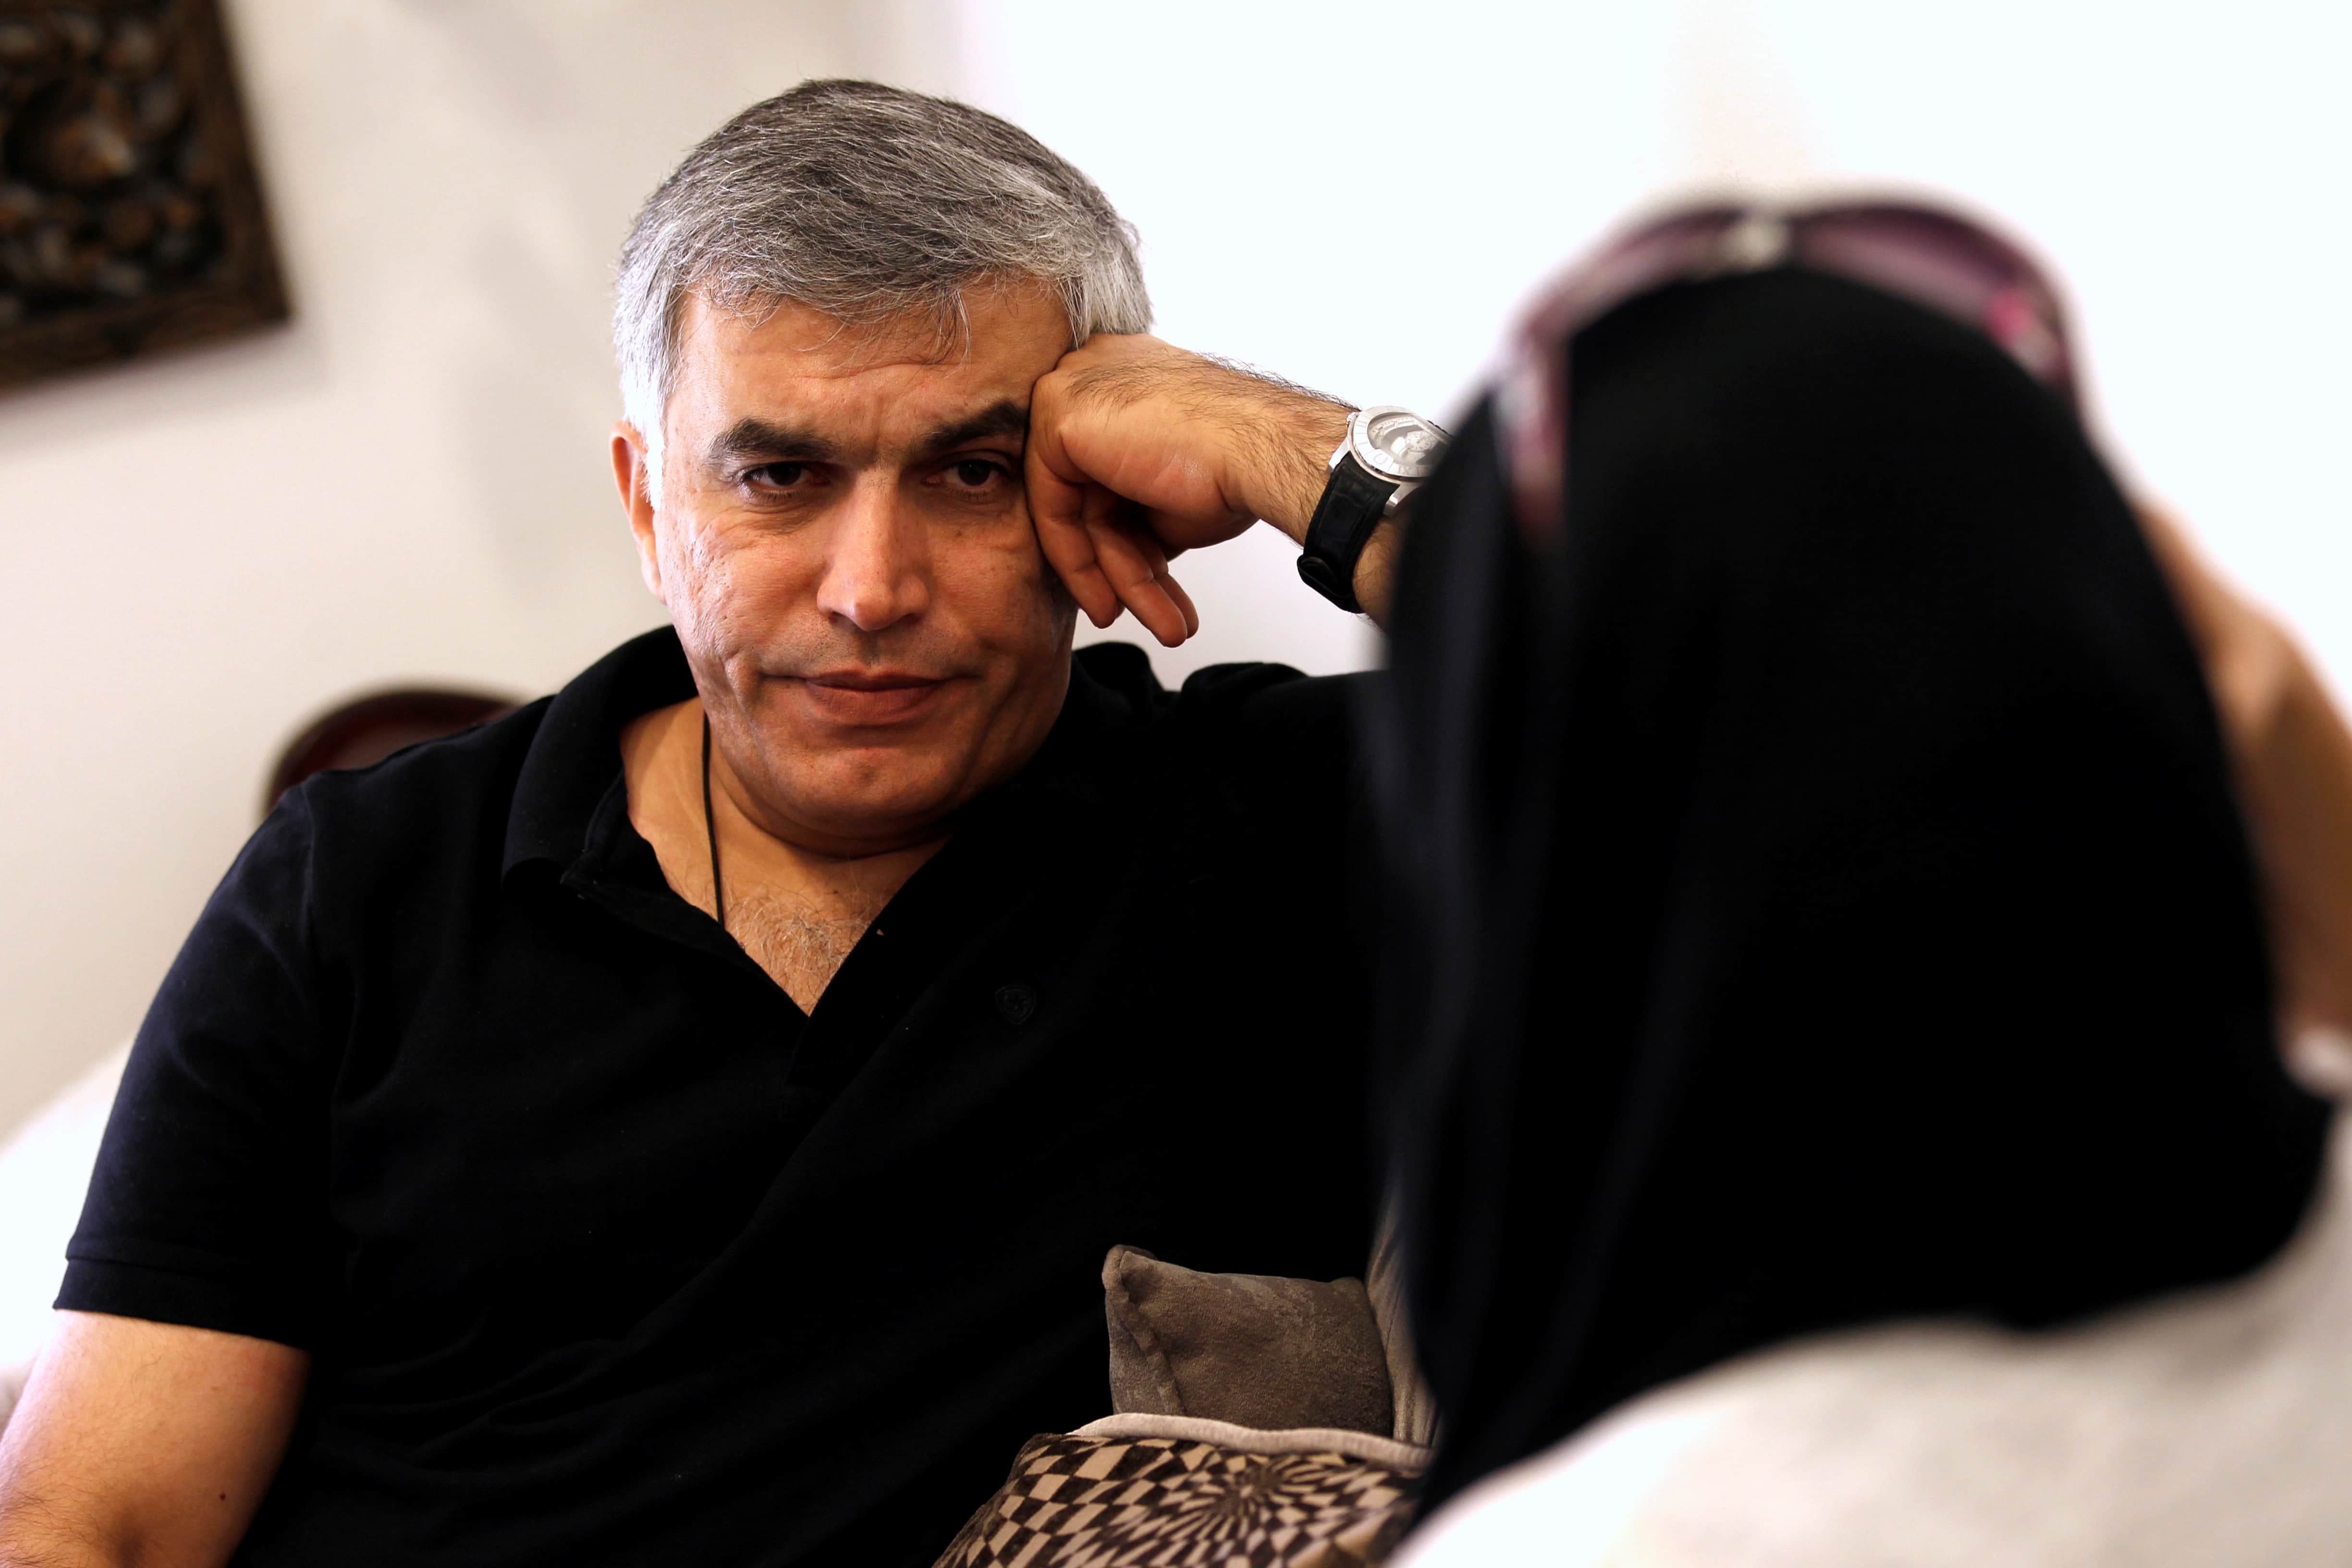 Human rights activists, Zainab al-Khawaja and Nabeel Rajab (L) talk during their meeting with activists after al-Khawaja's release from prison, Manama, Bahrain, June 3, 2016, REUTERS/Hamad I Mohammed